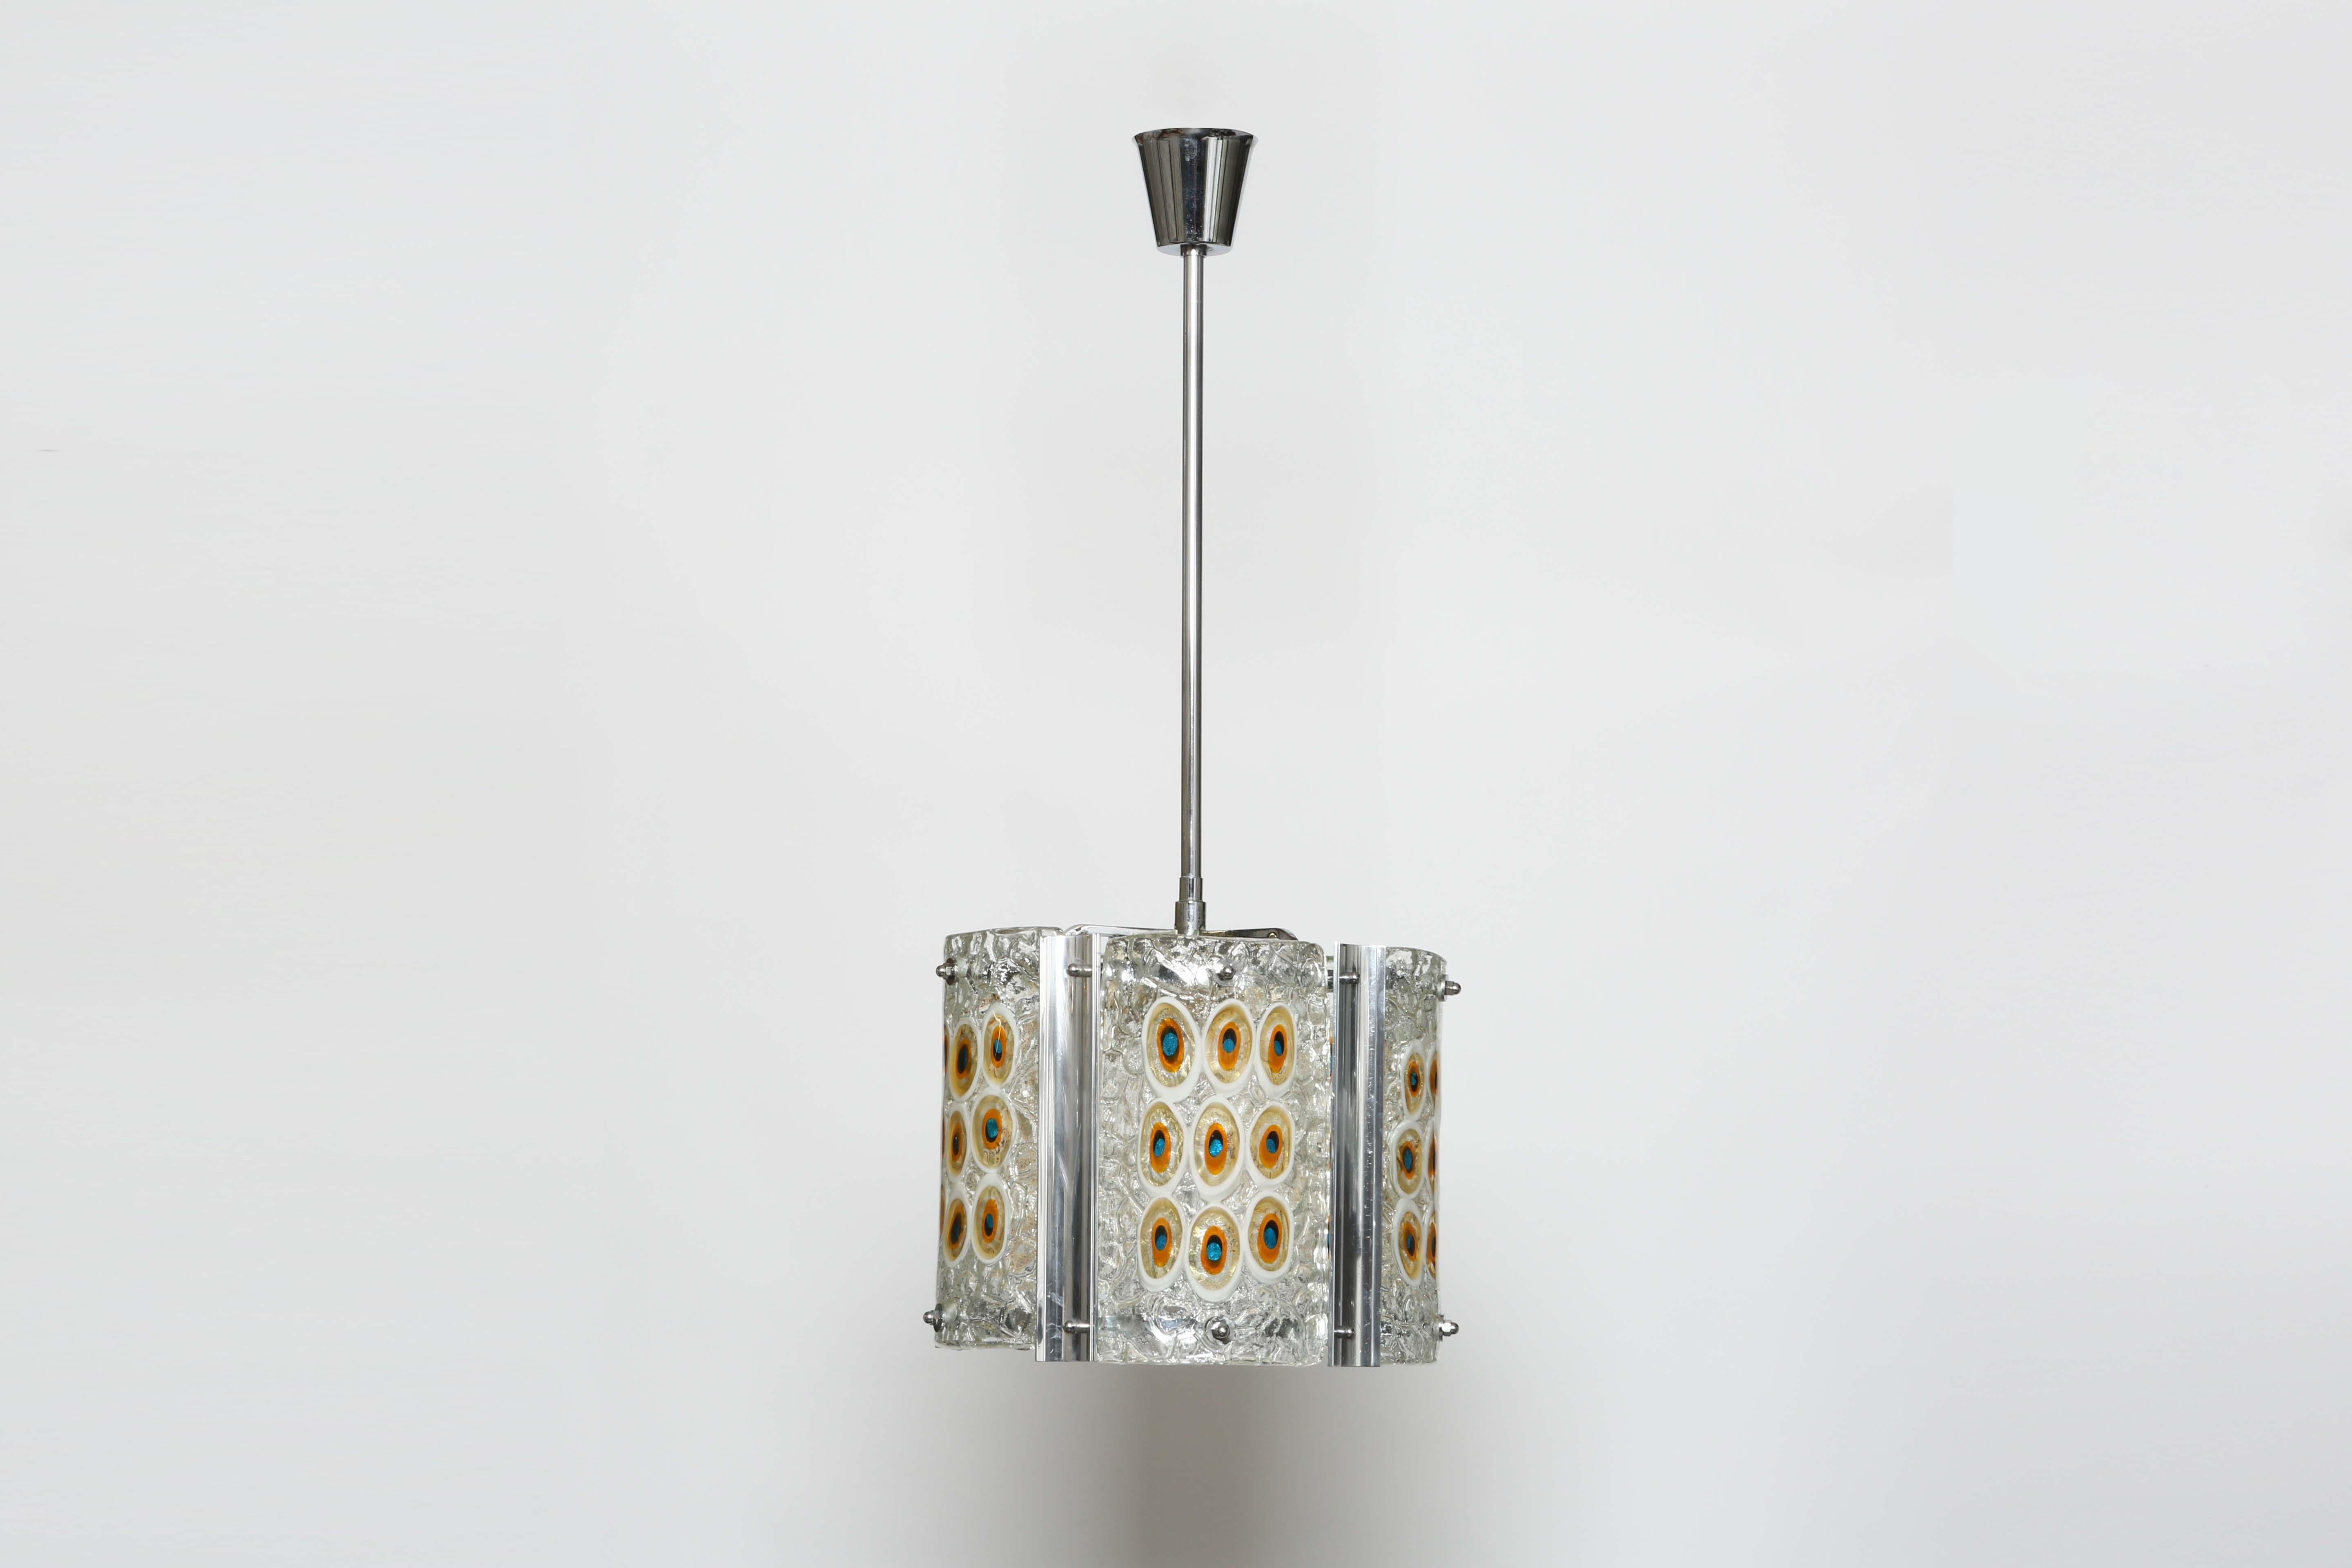 Gianmaria Potenza for La Murrina suspension light, circa 1970s
Designed and manufactured in Italy.
Murano glass, chrome plated metal, metal.
6 candelabra sockets.
Complimentary US rewiring upon request.
Height adjustable.